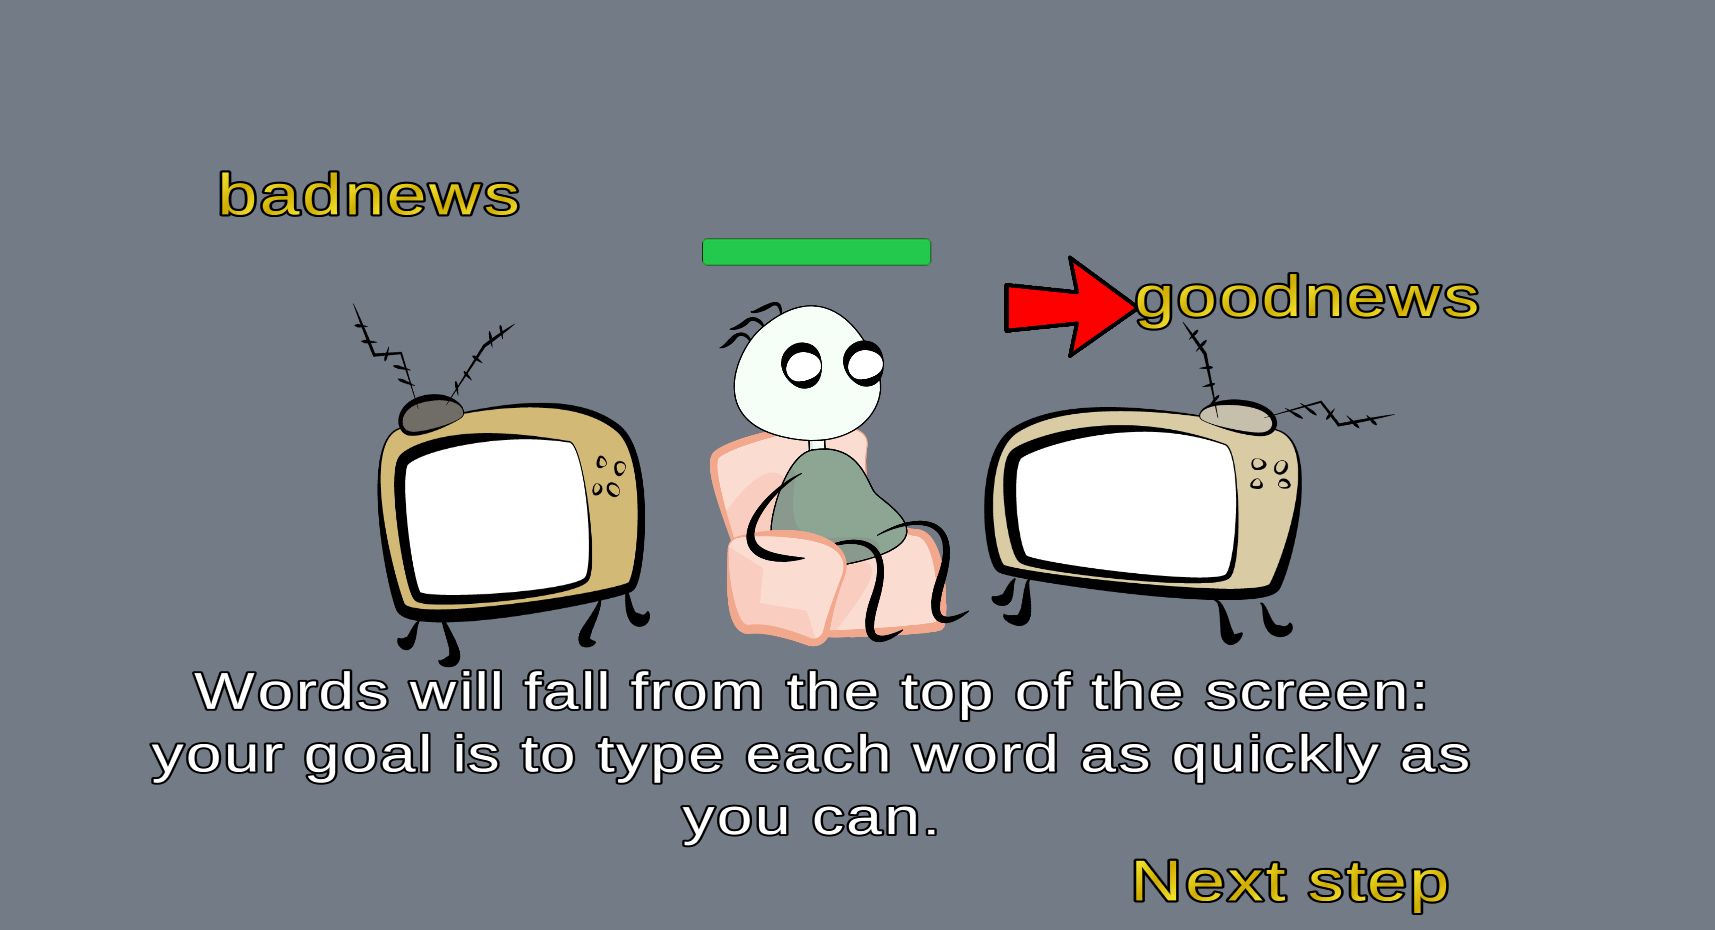 Tutorial instructions below the character sat between the televisions.